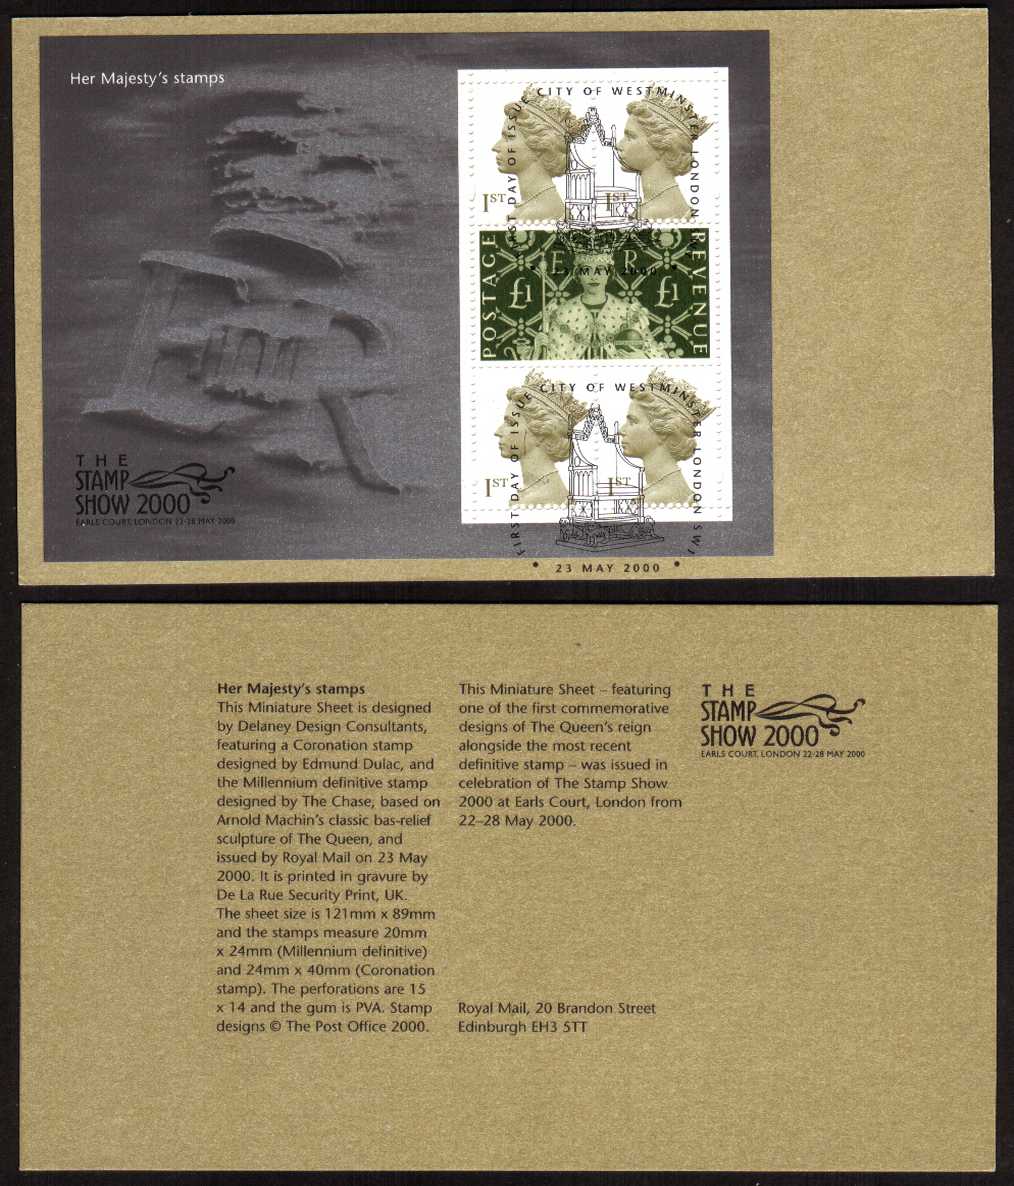 view larger image for SG MS2147v (23 May 2000) - 'Stamp Show 2000' - 'Her Majestys's Stamps' minisheet<br/>
on the official presentation card that came from a folder that contained the three prestige booklets for the 2010 show. Note: I have scanned both sides of the card. The price is for one card.